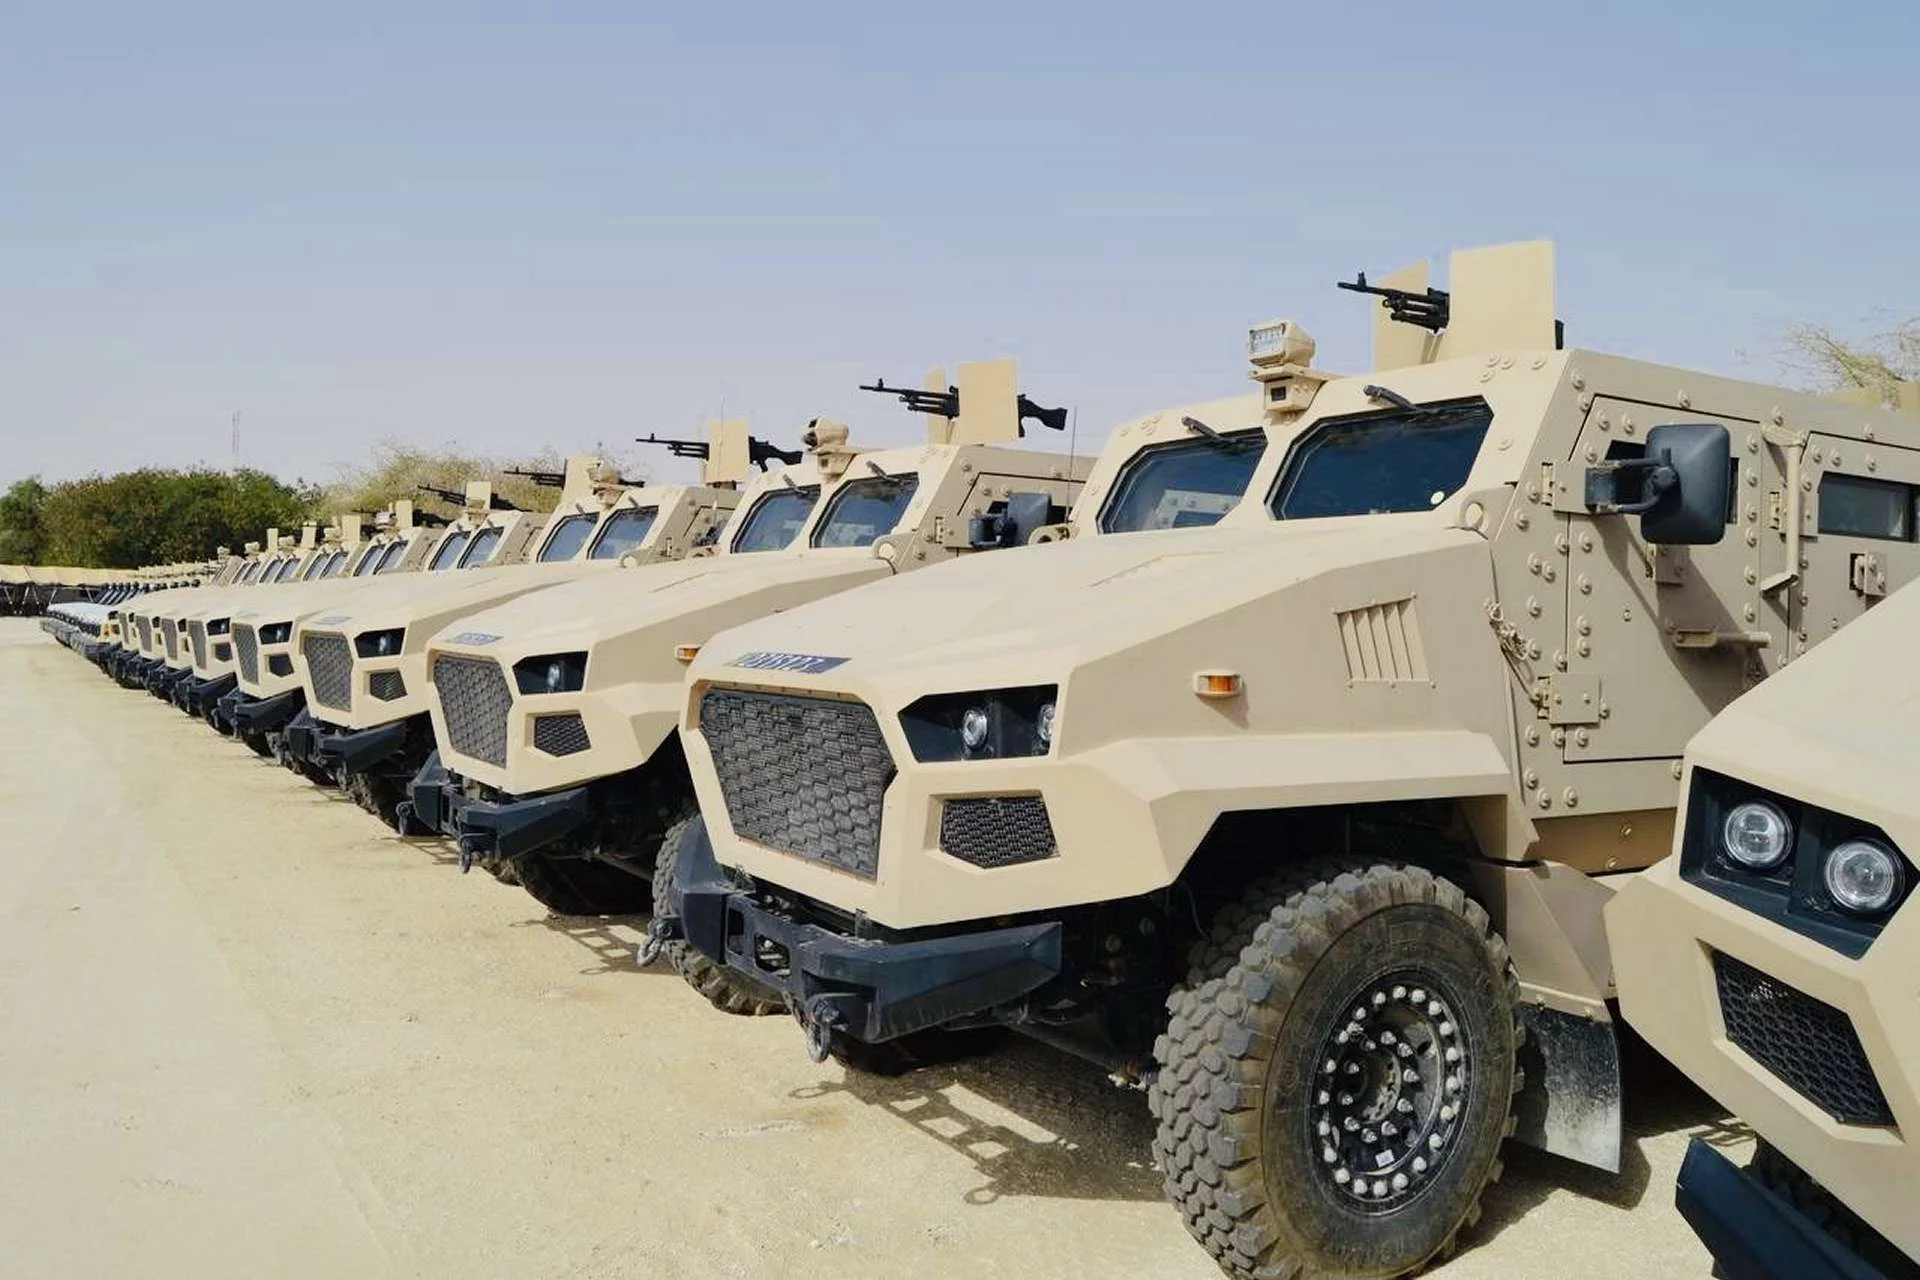 Mauritania%20Acquires%20Chinese%20Armored%20Vehicles%20Including%20WMA-301%20002-24f31030.webp